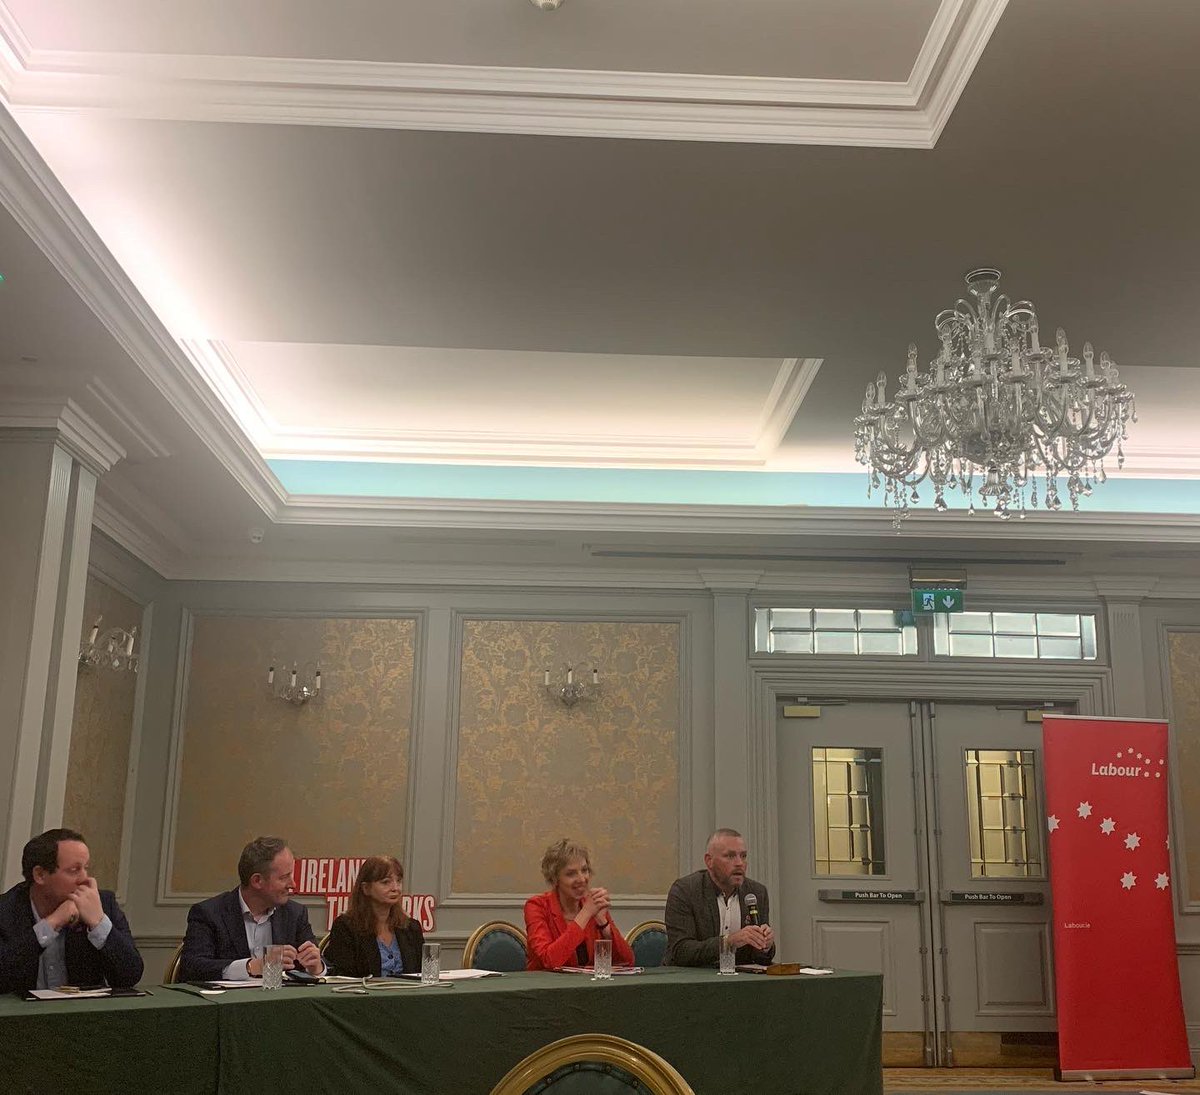 A great public meeting last night in #Cork with ⁦@UCCLabour⁩ ⁦@seansherlocktd⁩ ⁦@jmaher0⁩ @horganp ⁦@CathalRasmussen⁩ - good to see our @labour Councillors from #Waterford ⁦@thomasphelan⁩ & ⁦@VoteJohnPratt⁩ there too!